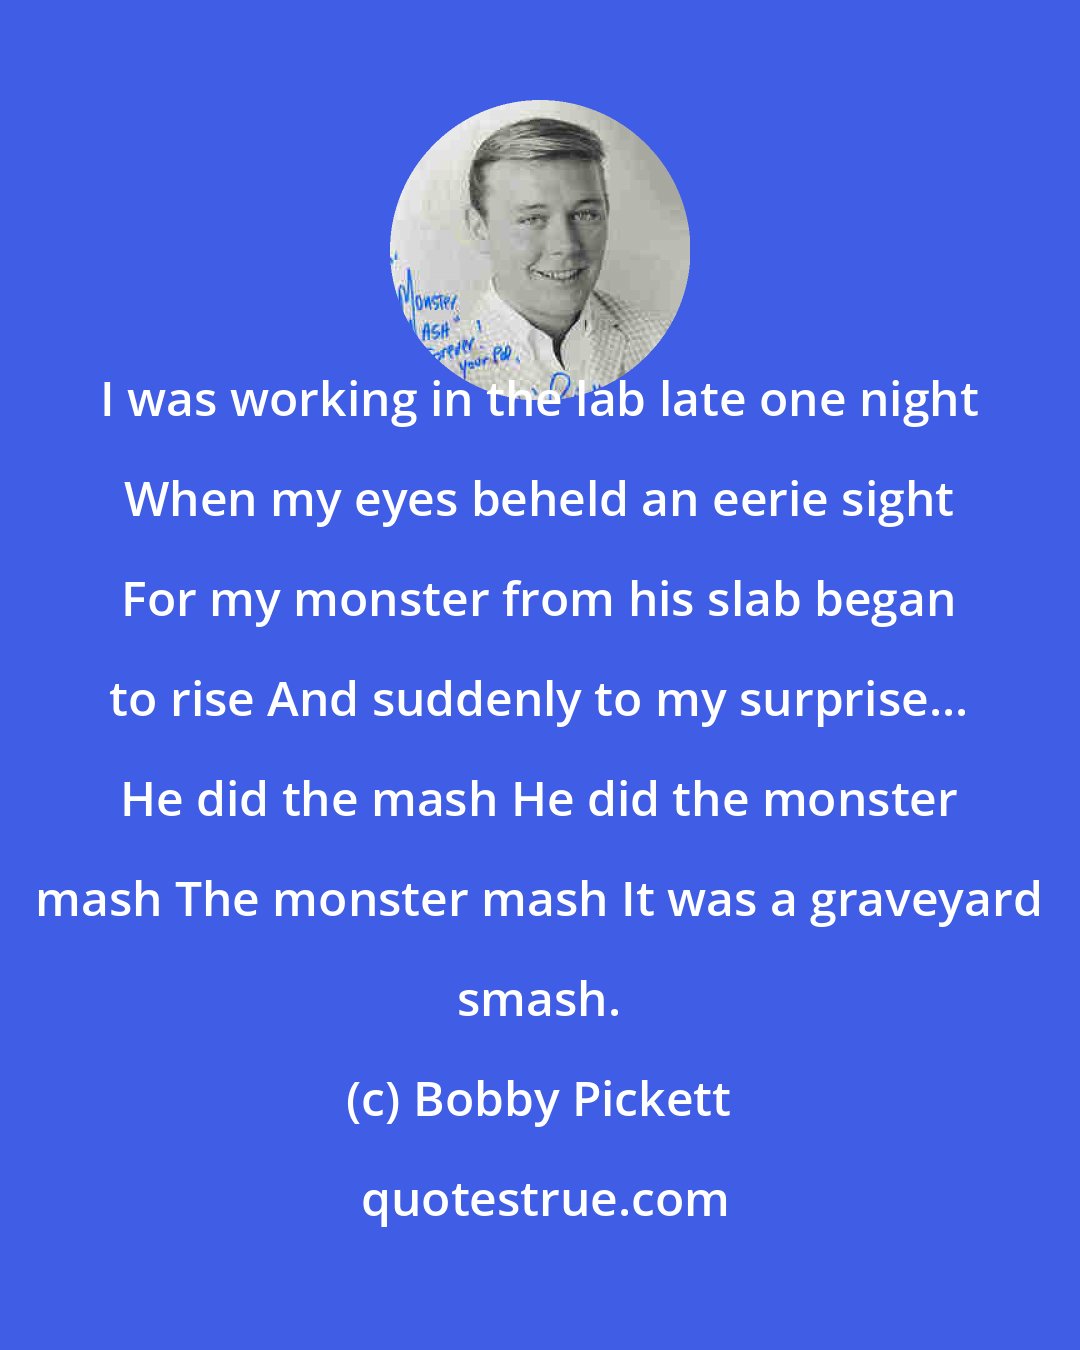 Bobby Pickett: I was working in the lab late one night When my eyes beheld an eerie sight For my monster from his slab began to rise And suddenly to my surprise... He did the mash He did the monster mash The monster mash It was a graveyard smash.